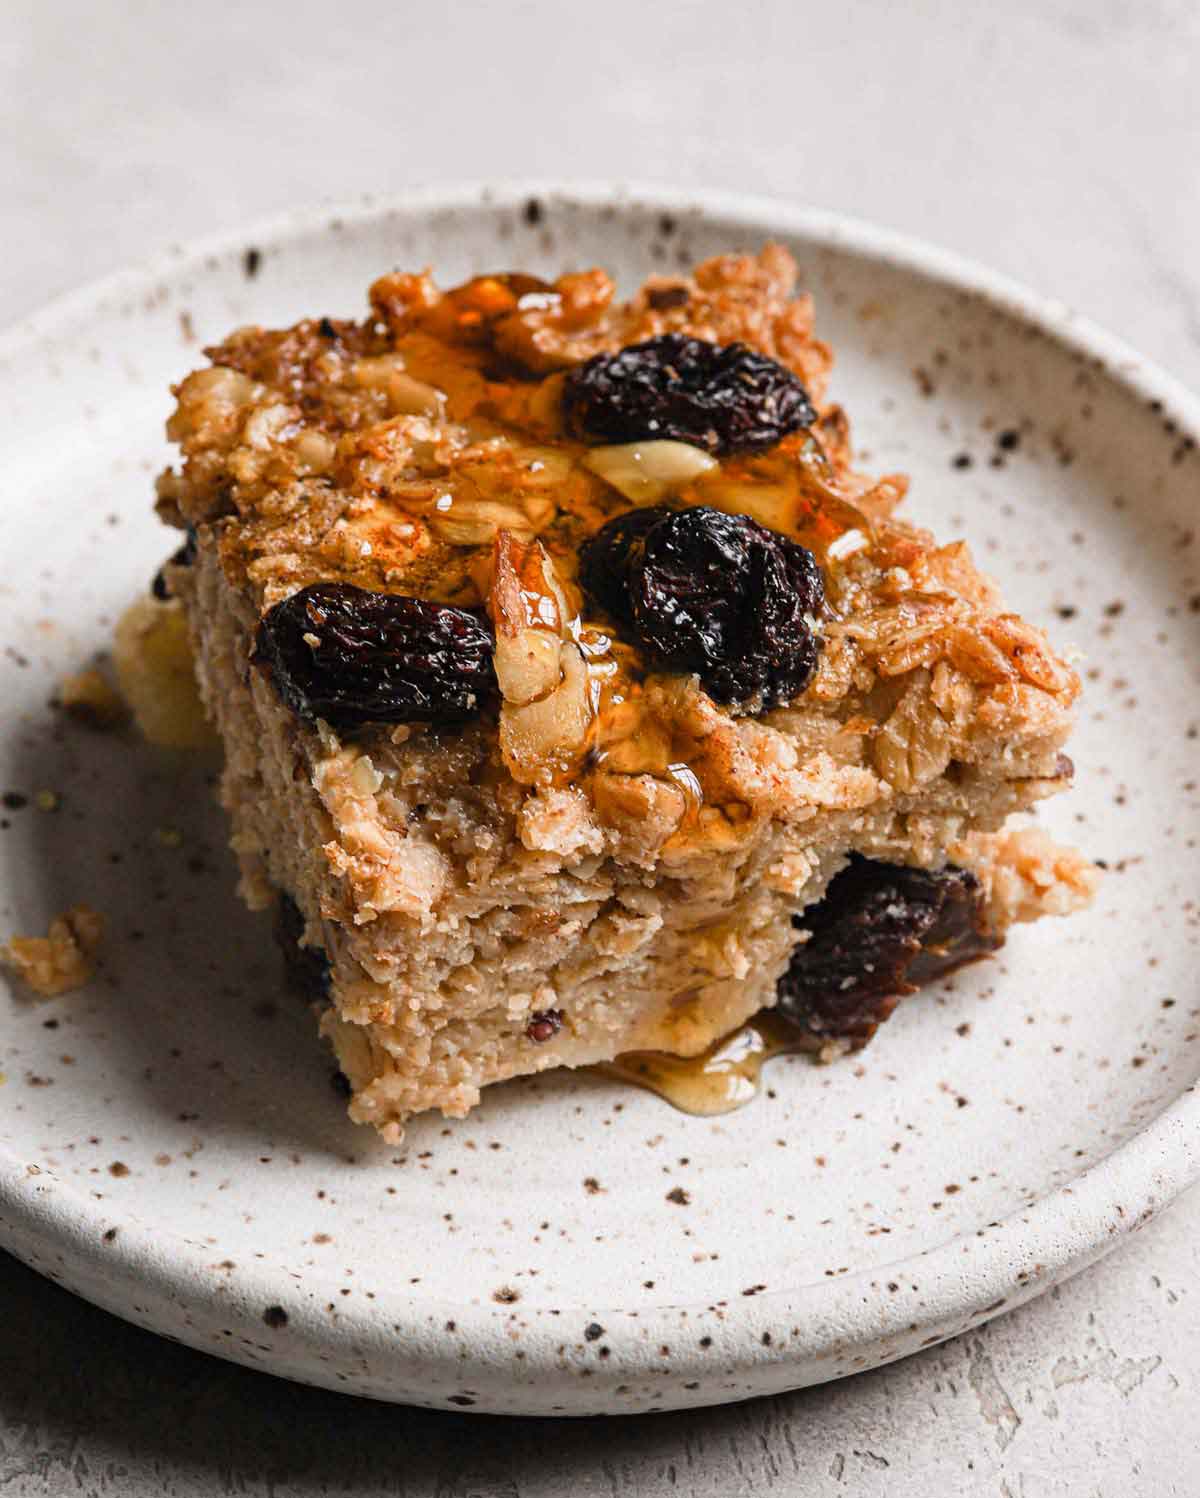 Slice of baked oatmeal with a drizzle of maple syrup on top on a speckled plate.